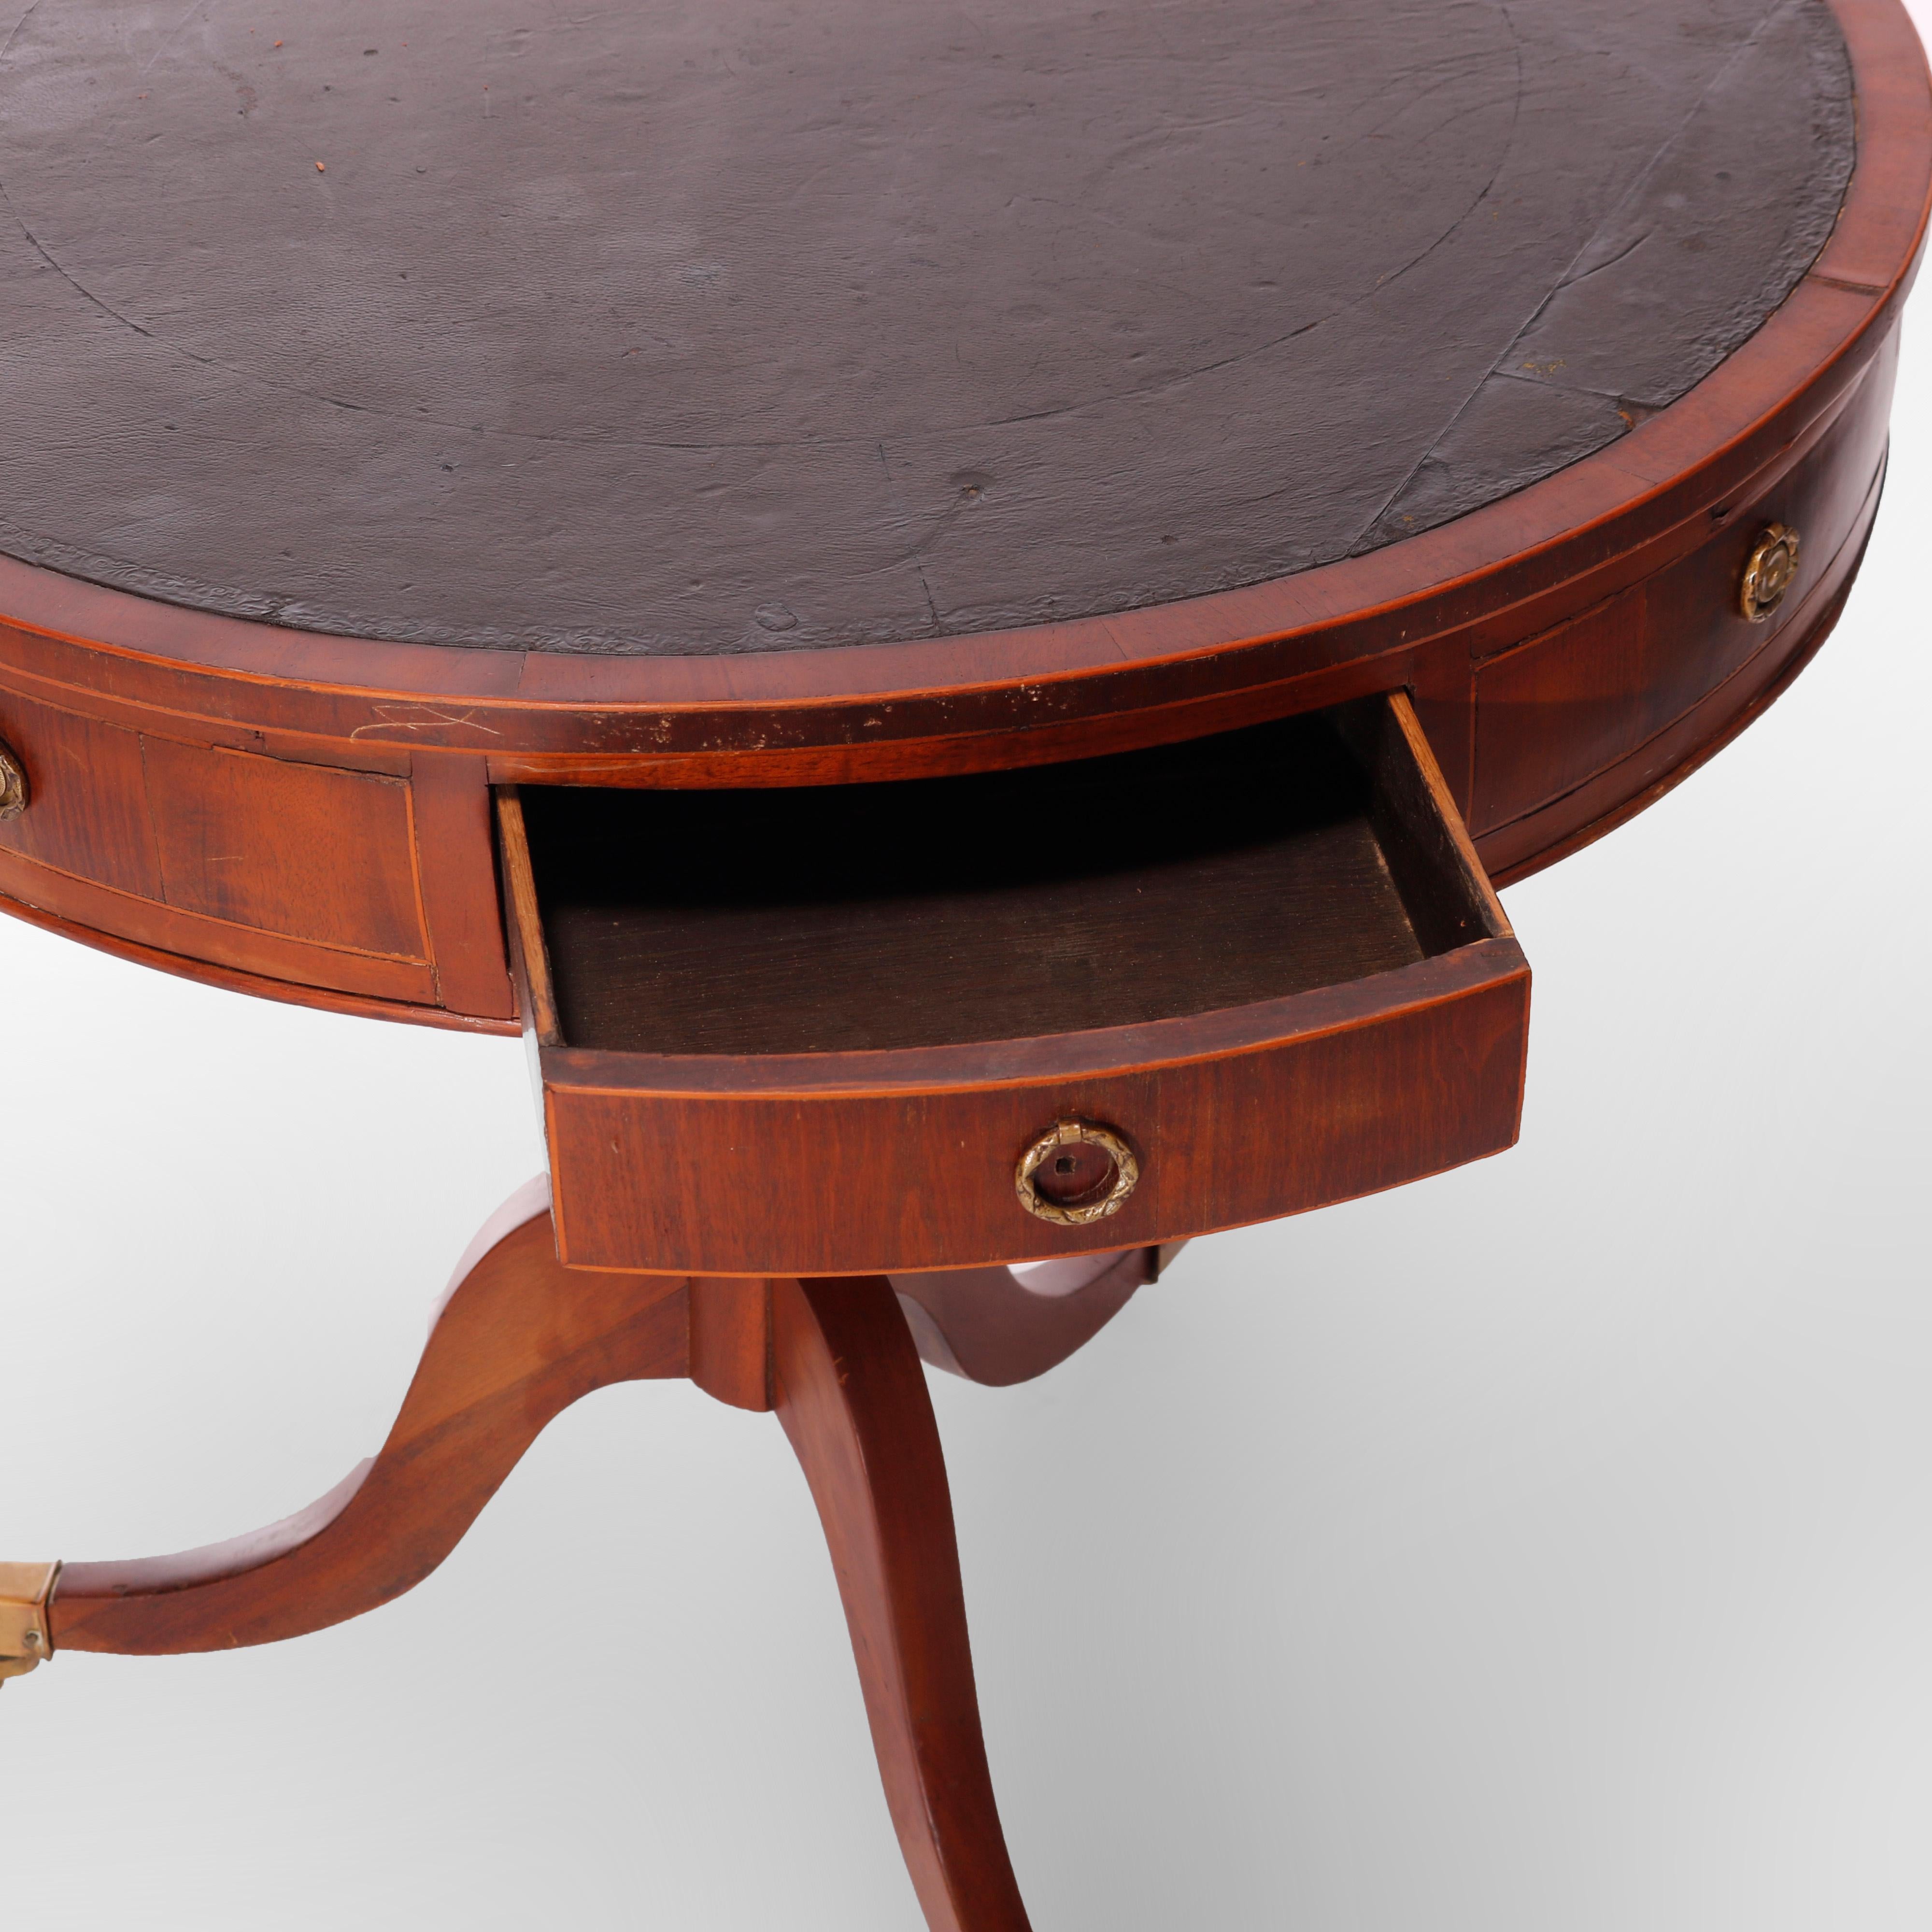  Antique English George III Mahogany Drum Game Table Circa 1820 For Sale 1